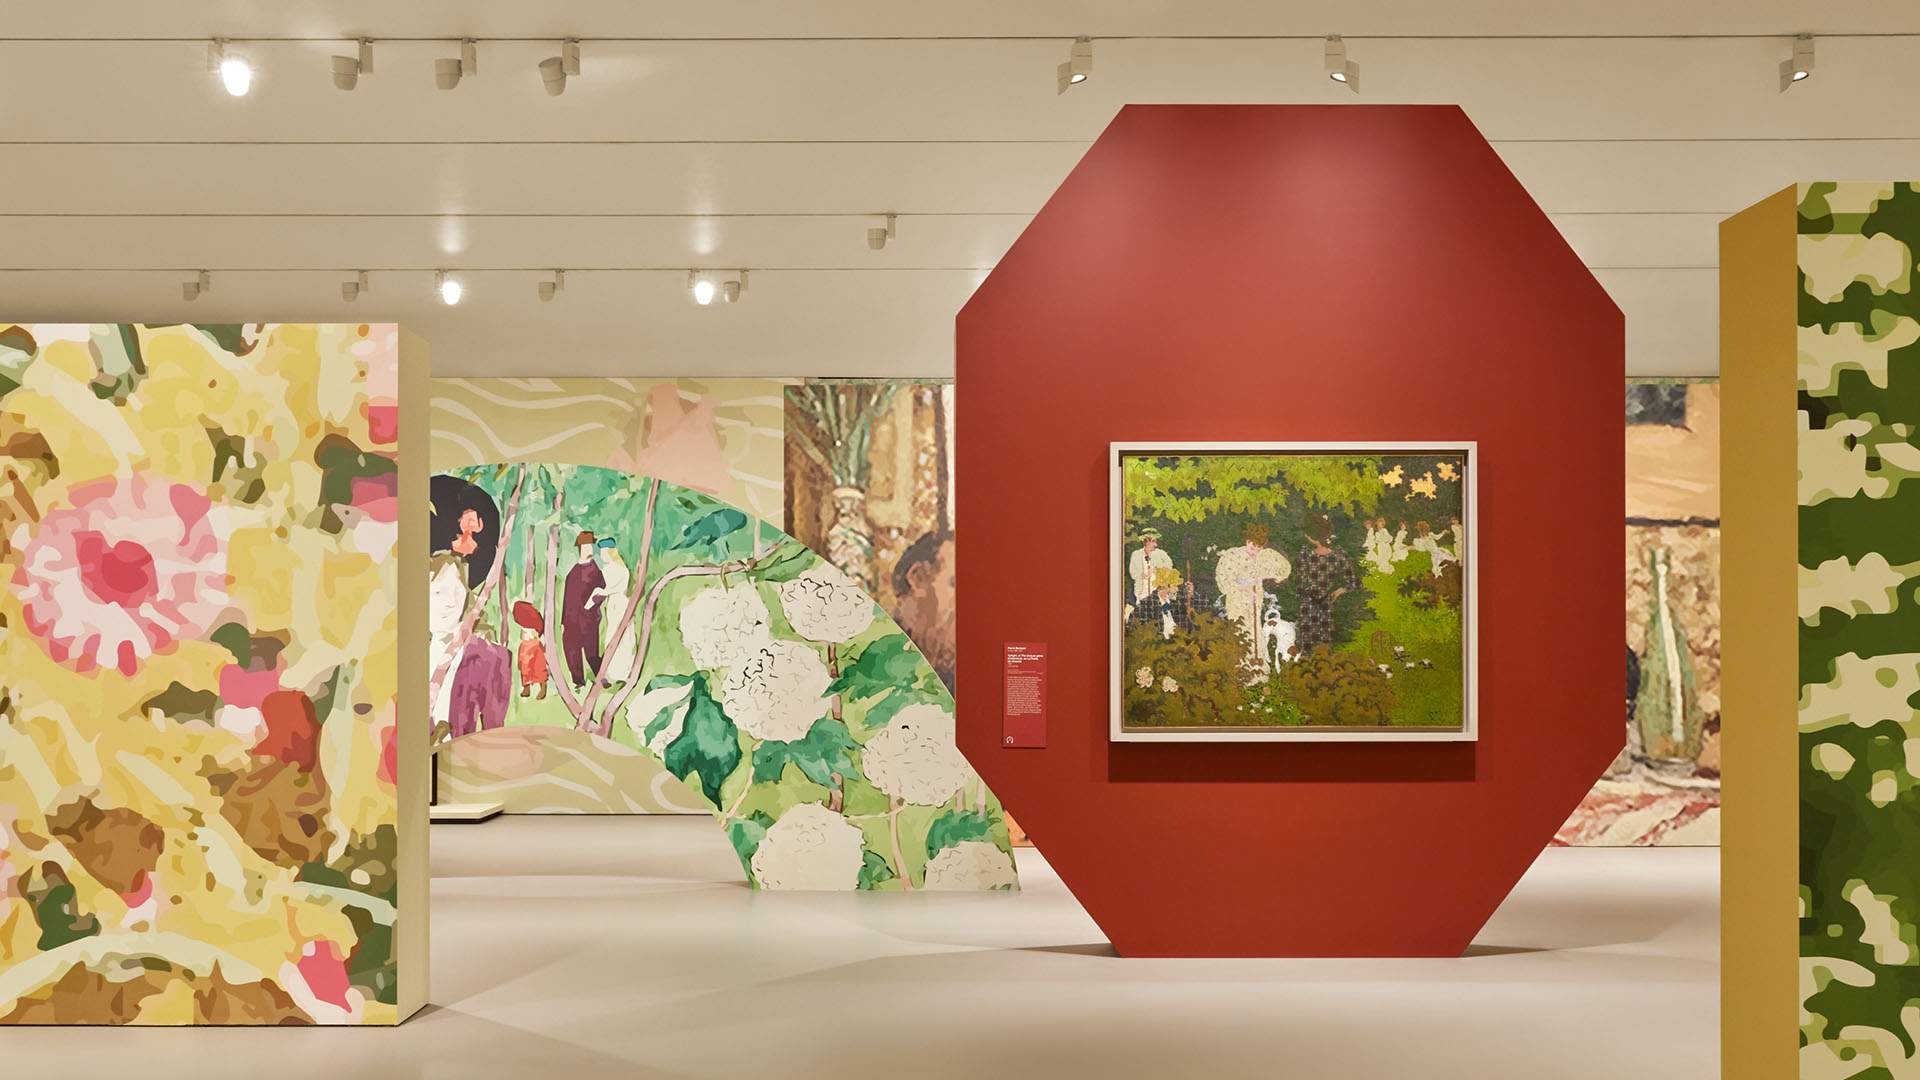 Now Open: A World-Premiere Pierre Bonnard Exhibition in Collaboration with the Musée d'Orsay Has Hit the NGV